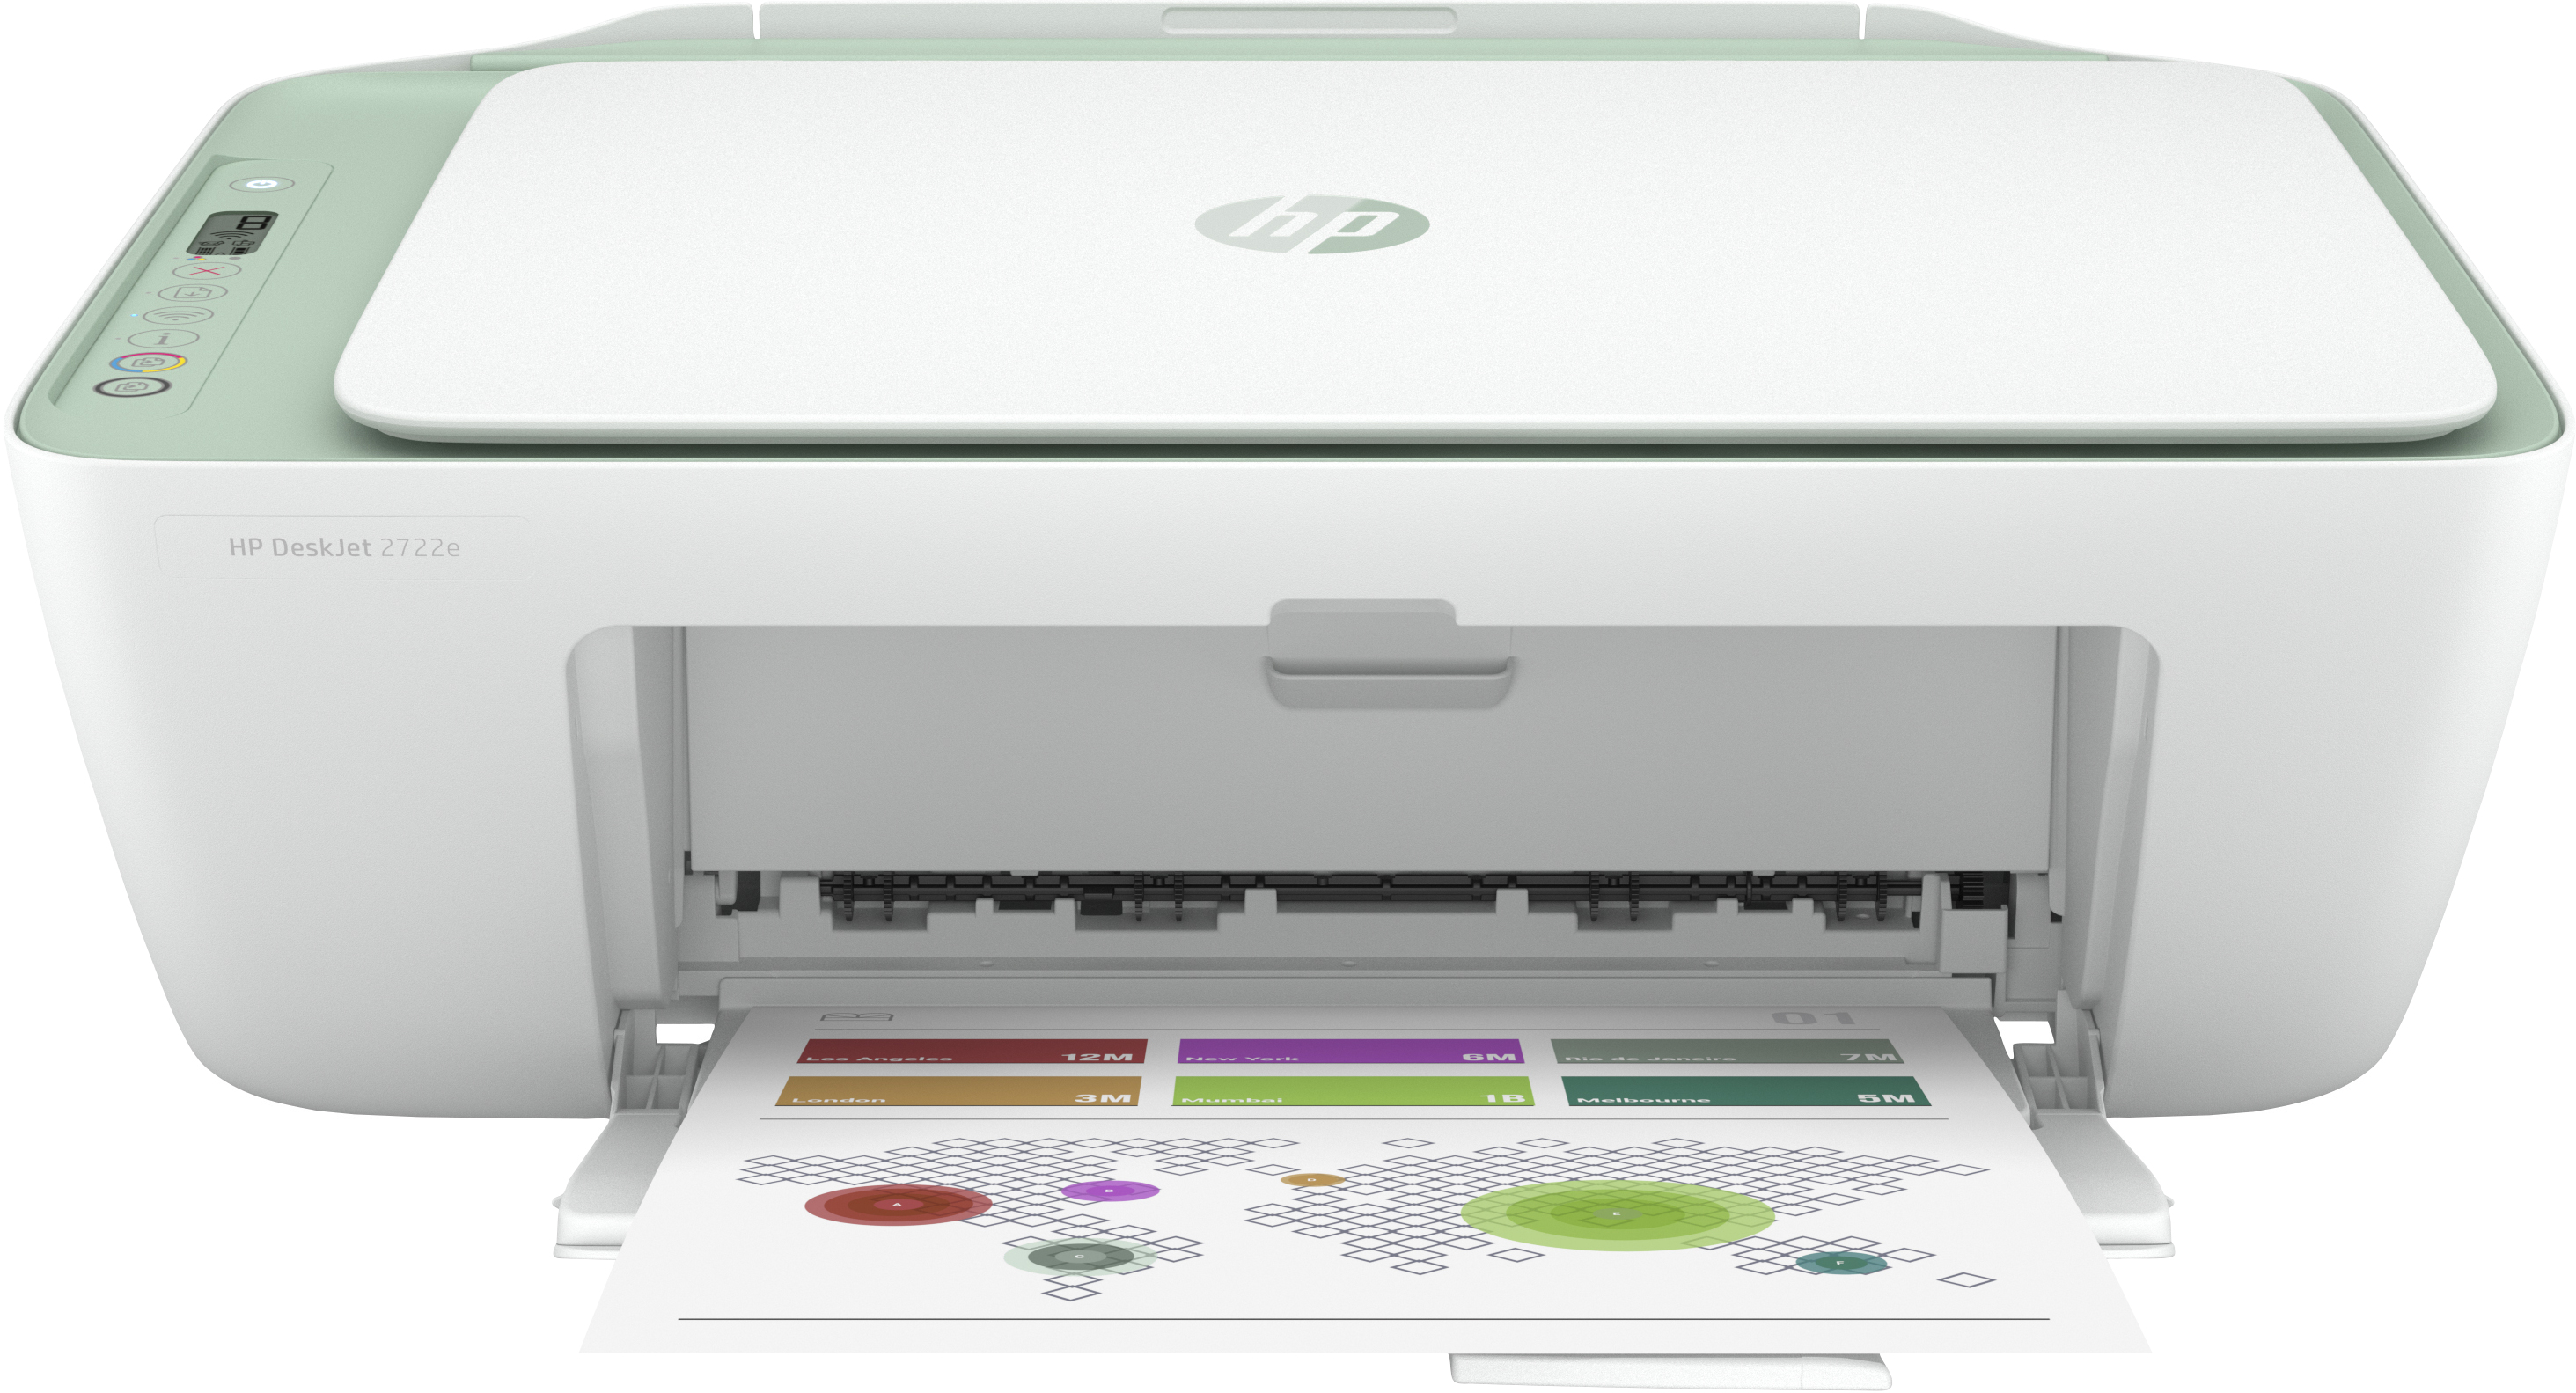  DeskJet 2722e All-in-One A4 color 5.5ppm Print Scan Copy